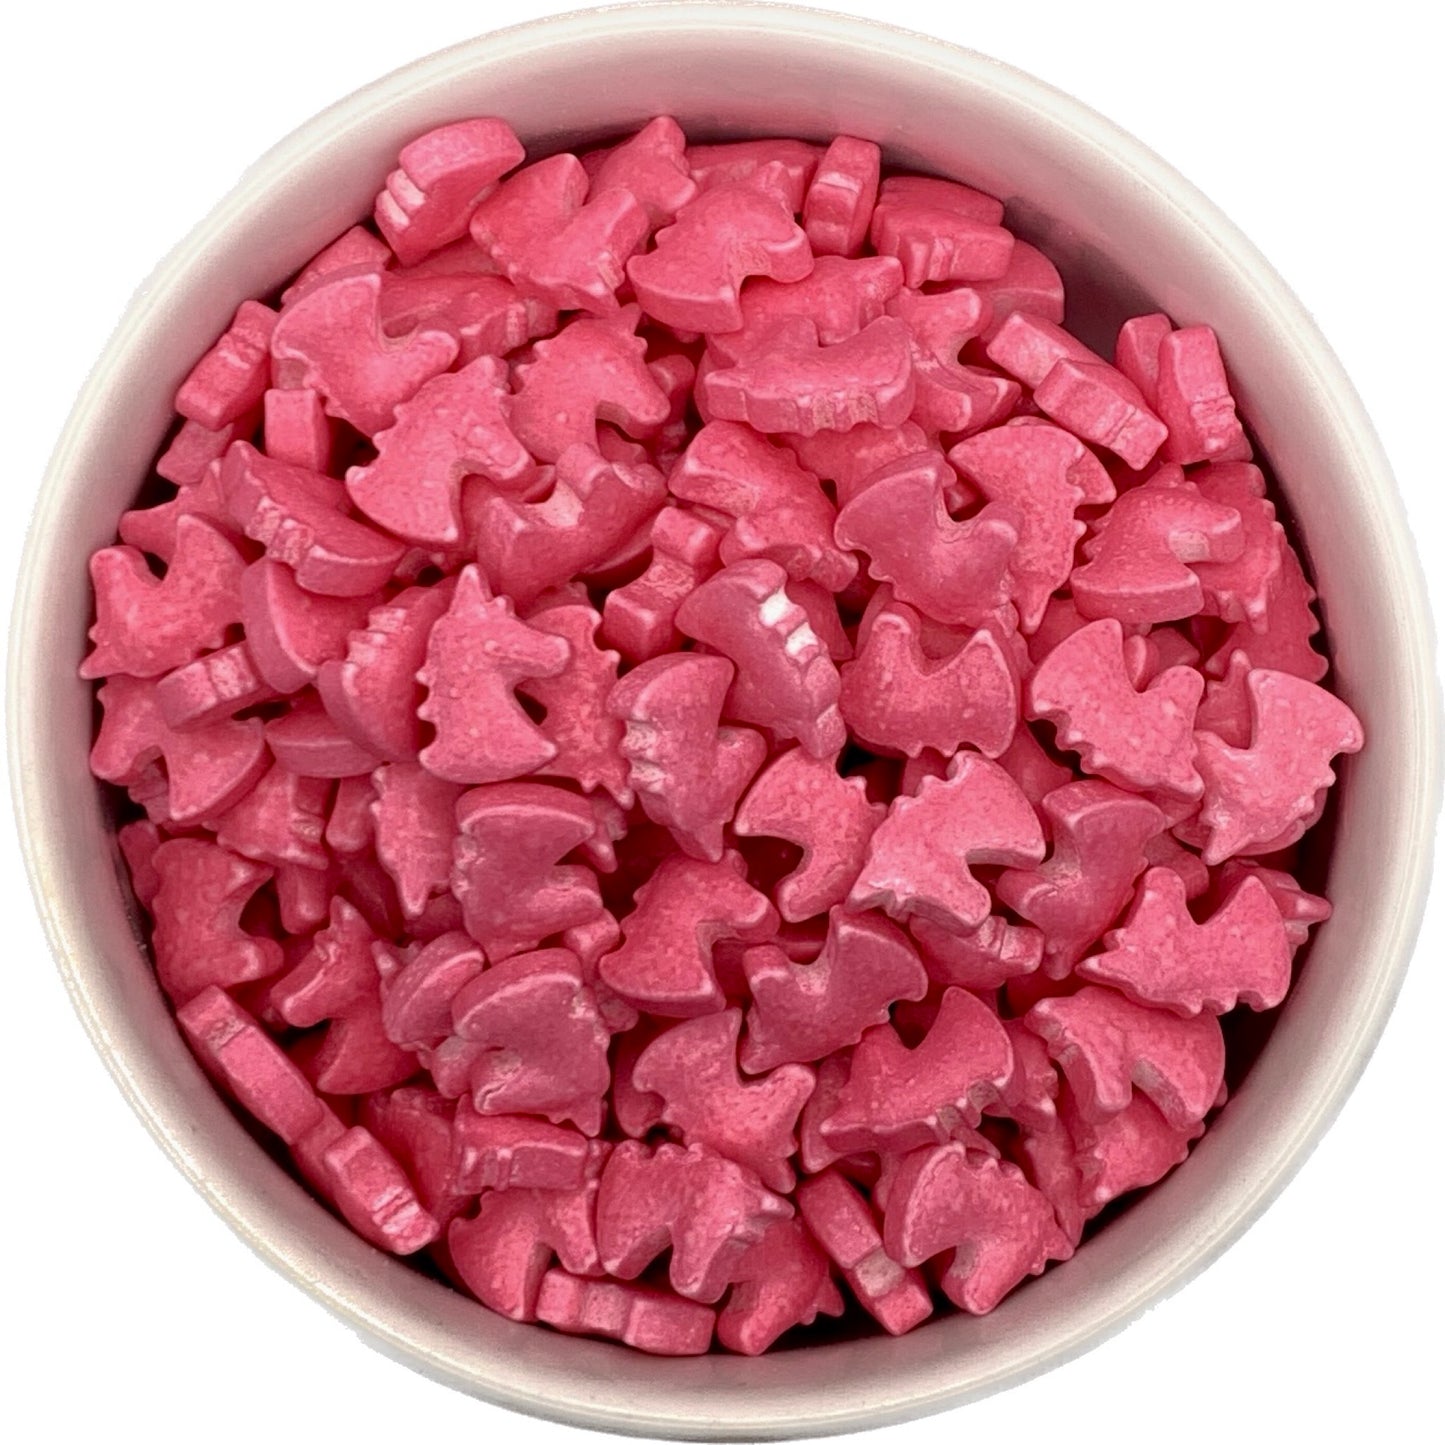 Pink Unicorn Head Sprinkles in a Bowl